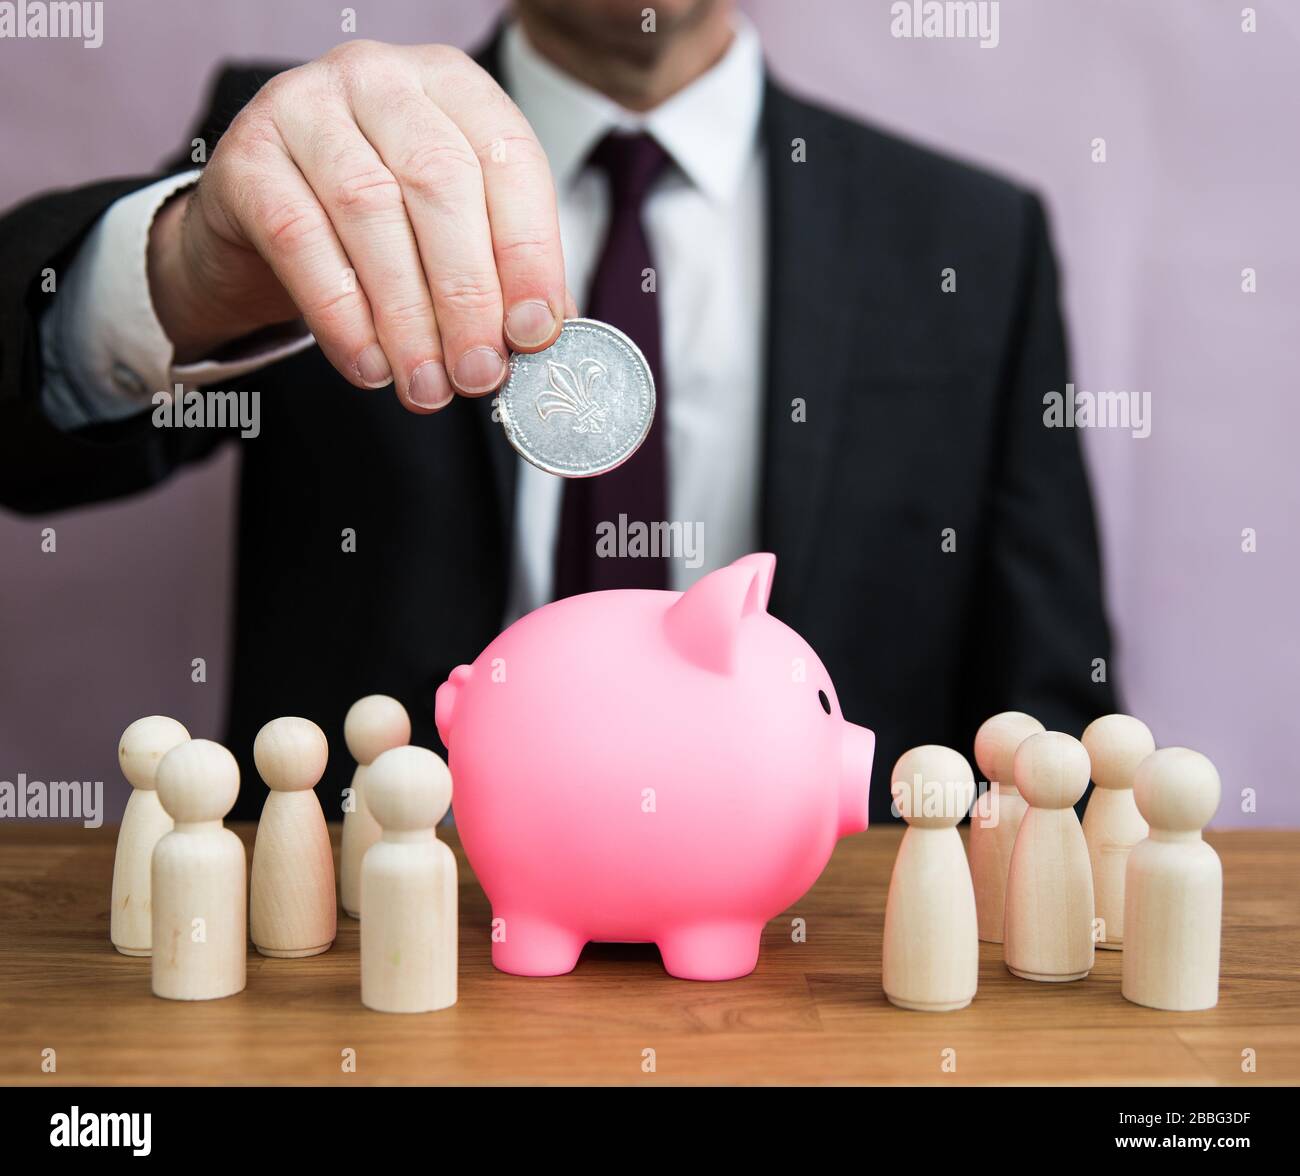 A business concept of a businessman paying into an employee salary, pension, tax, bonus or incentive scheme Stock Photo